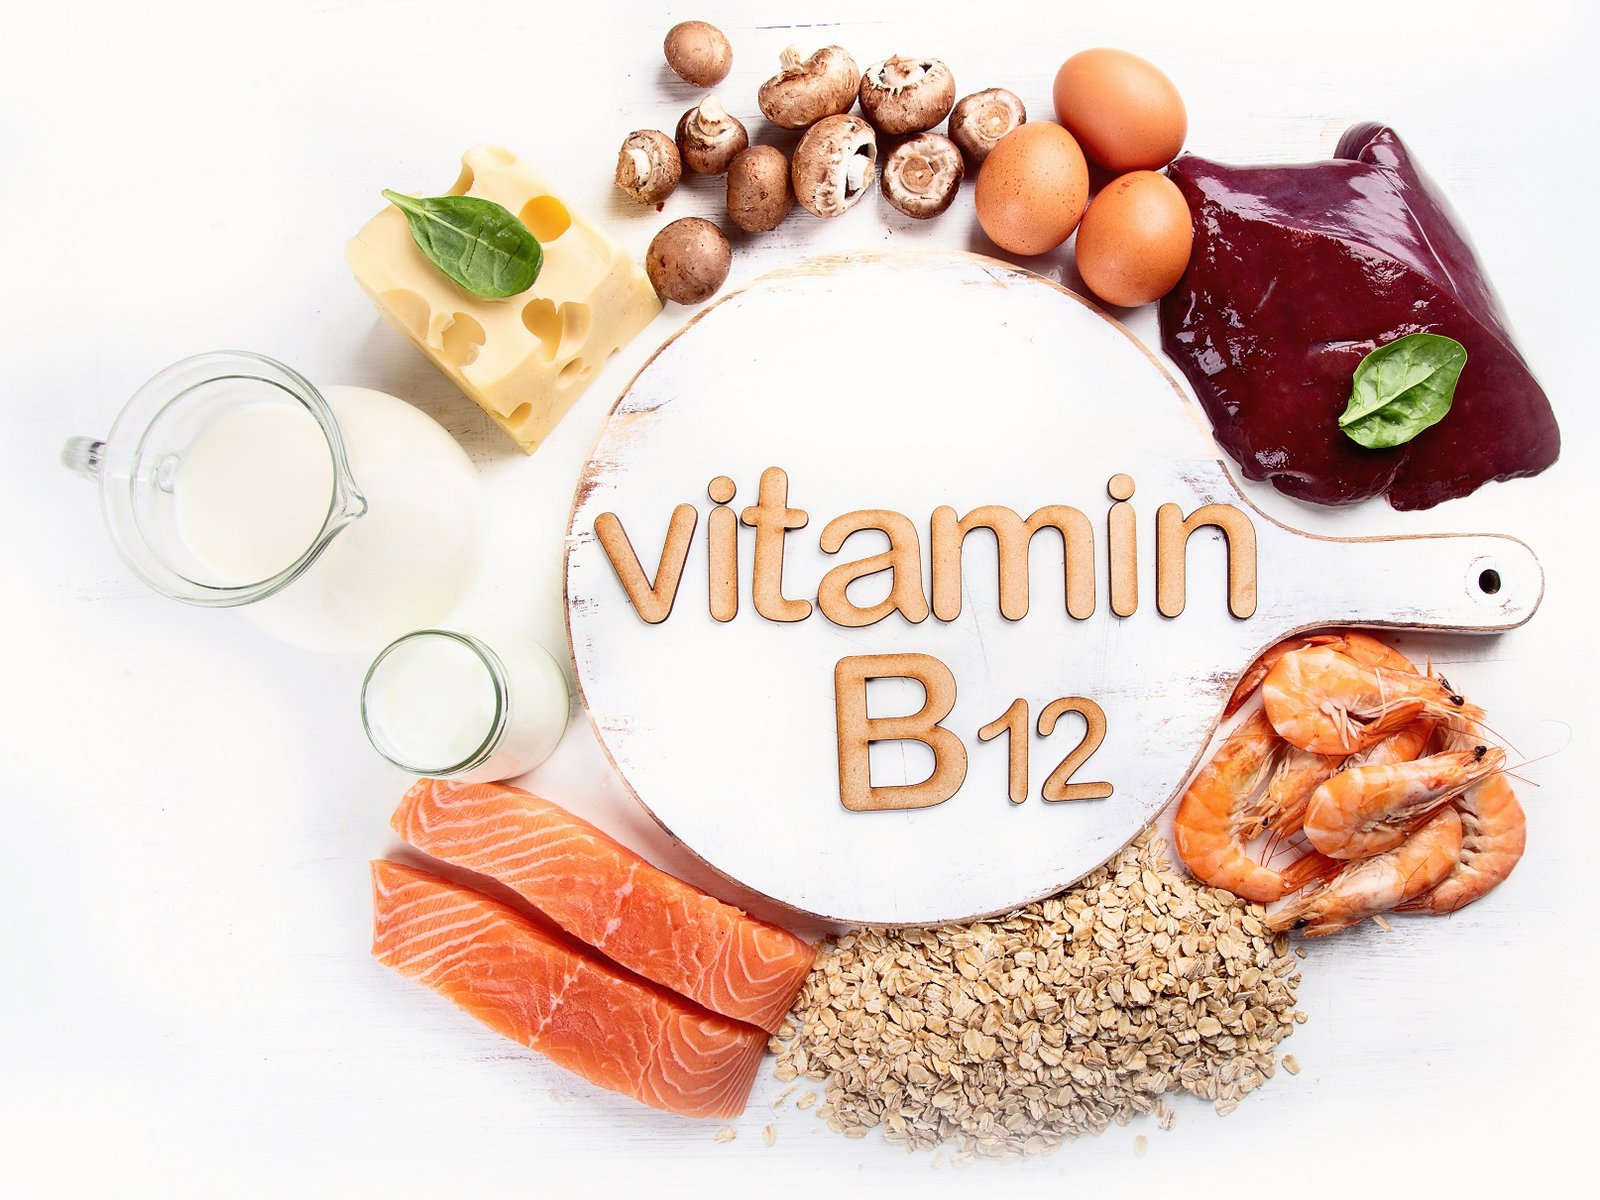 What happens if your Vitamin B12 is low?